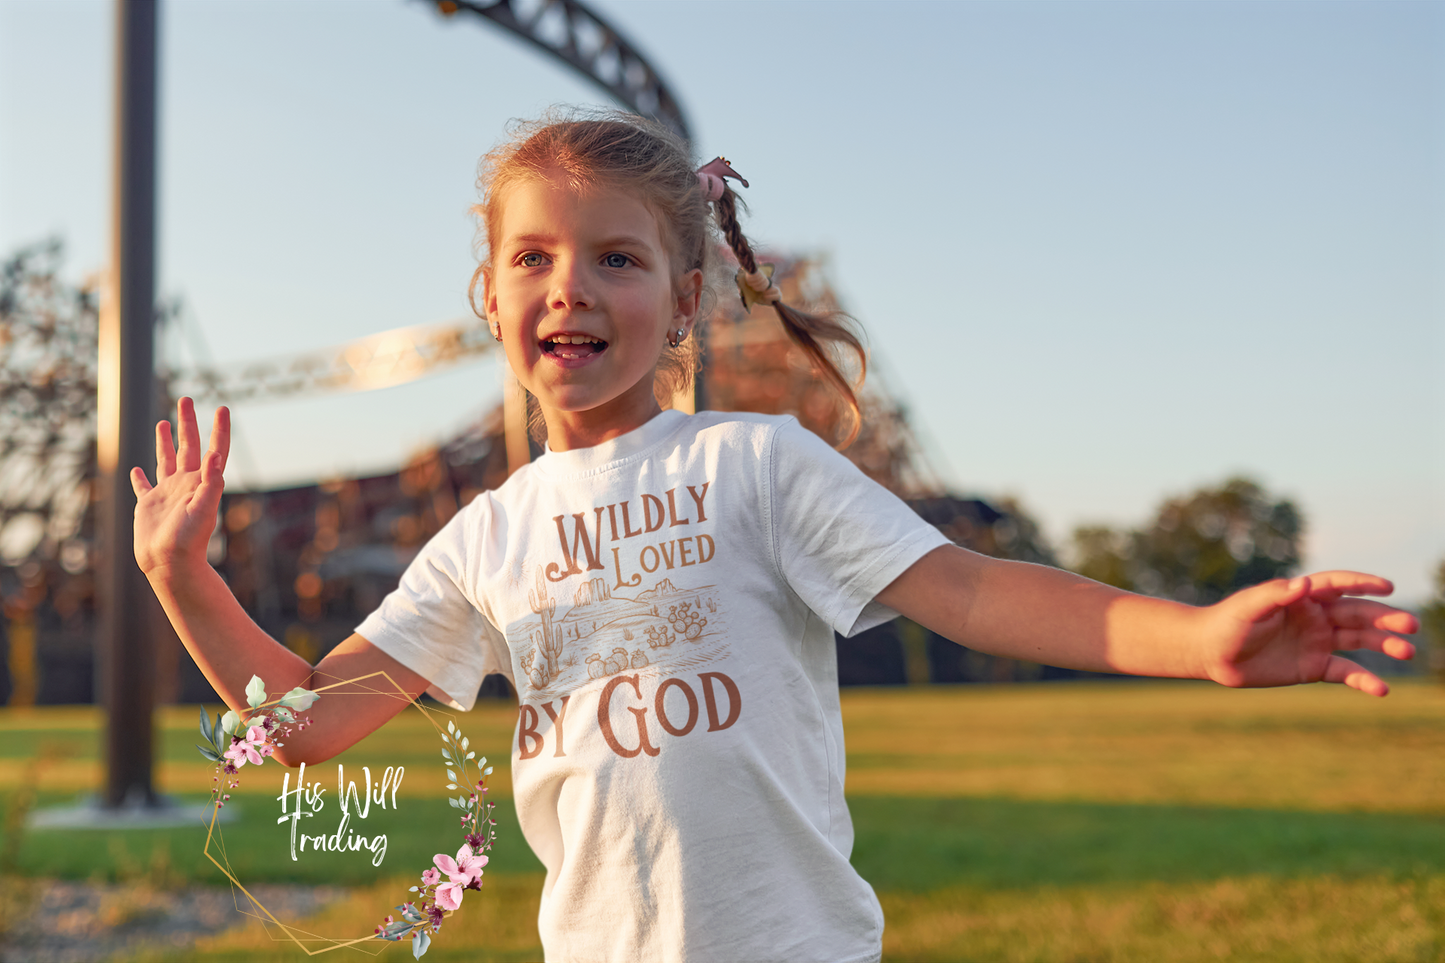 Wildly Loved By God Youth Tee White, Christian Graphic Tee, Kids Graphic Tee, Light Blue